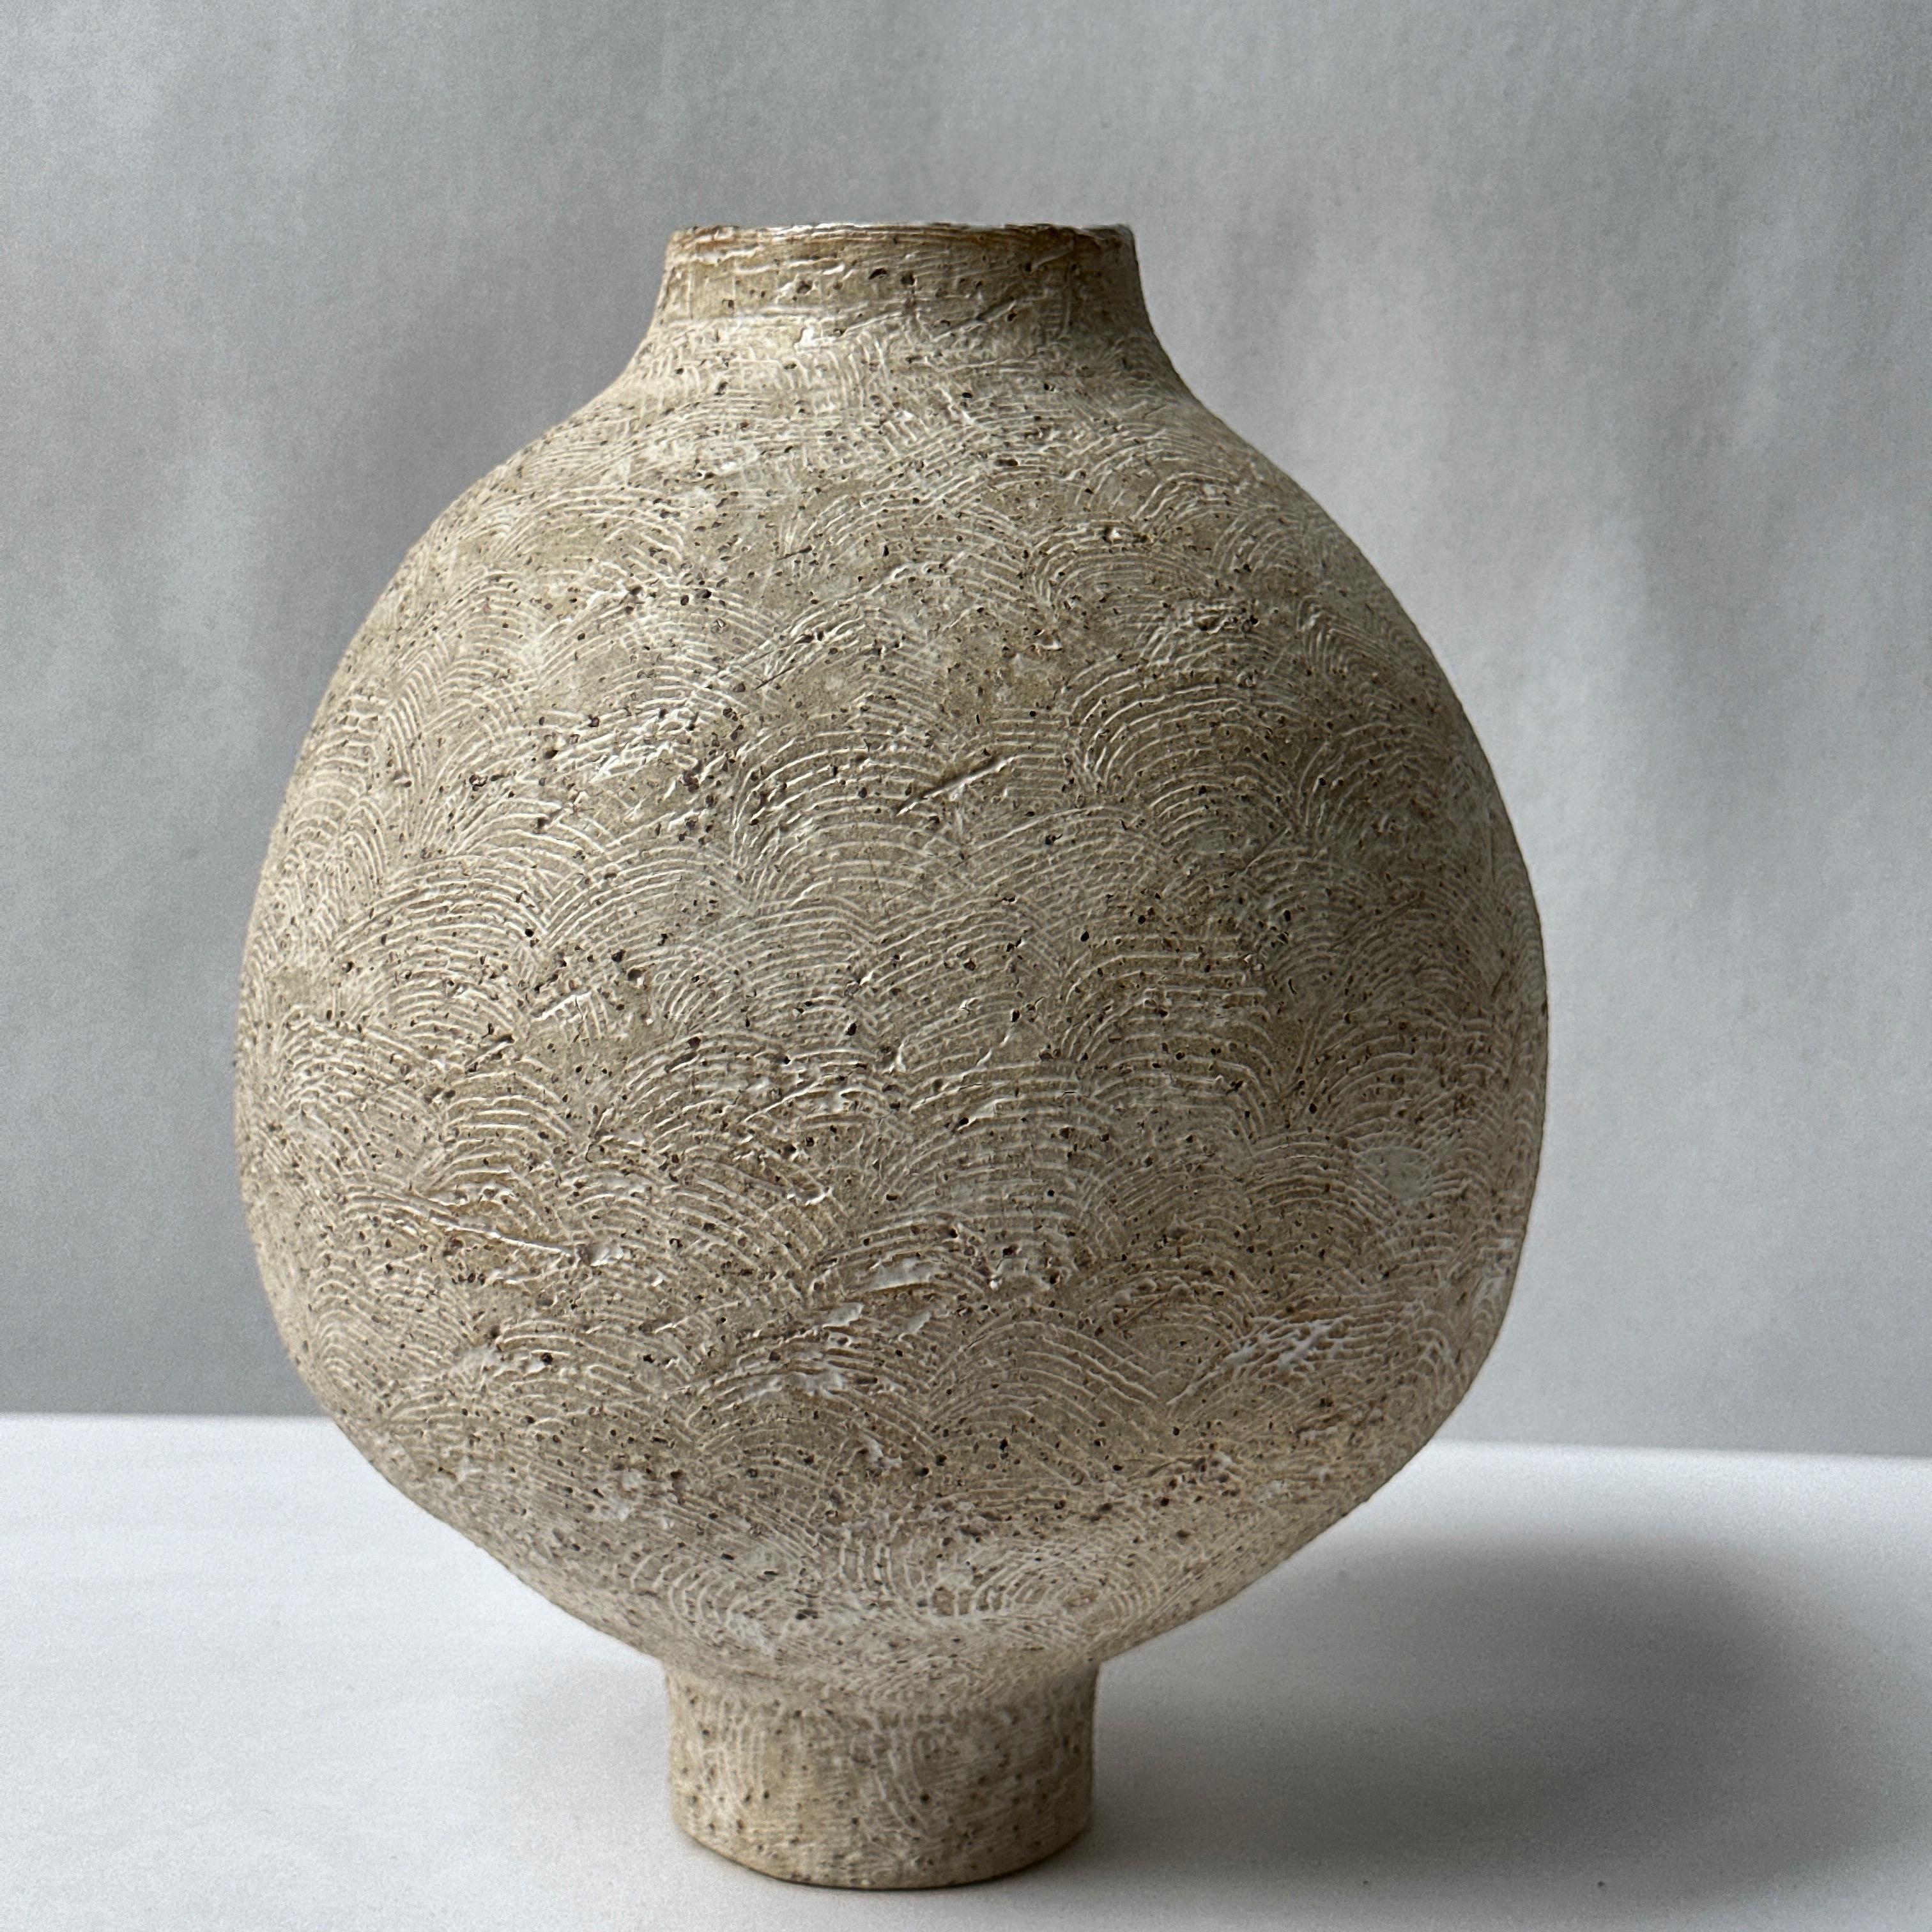 Beige Stoneware Coiled Moon Jar by Elena Vasilantonaki
Unique
Dimensions: ⌀ 23 x H 27 cm (Dimensions may vary)
Materials: Stoneware, Earthenware
Available finishes: Experimental Glazes, each one is unique

Growing up in Greece I was surrounded by